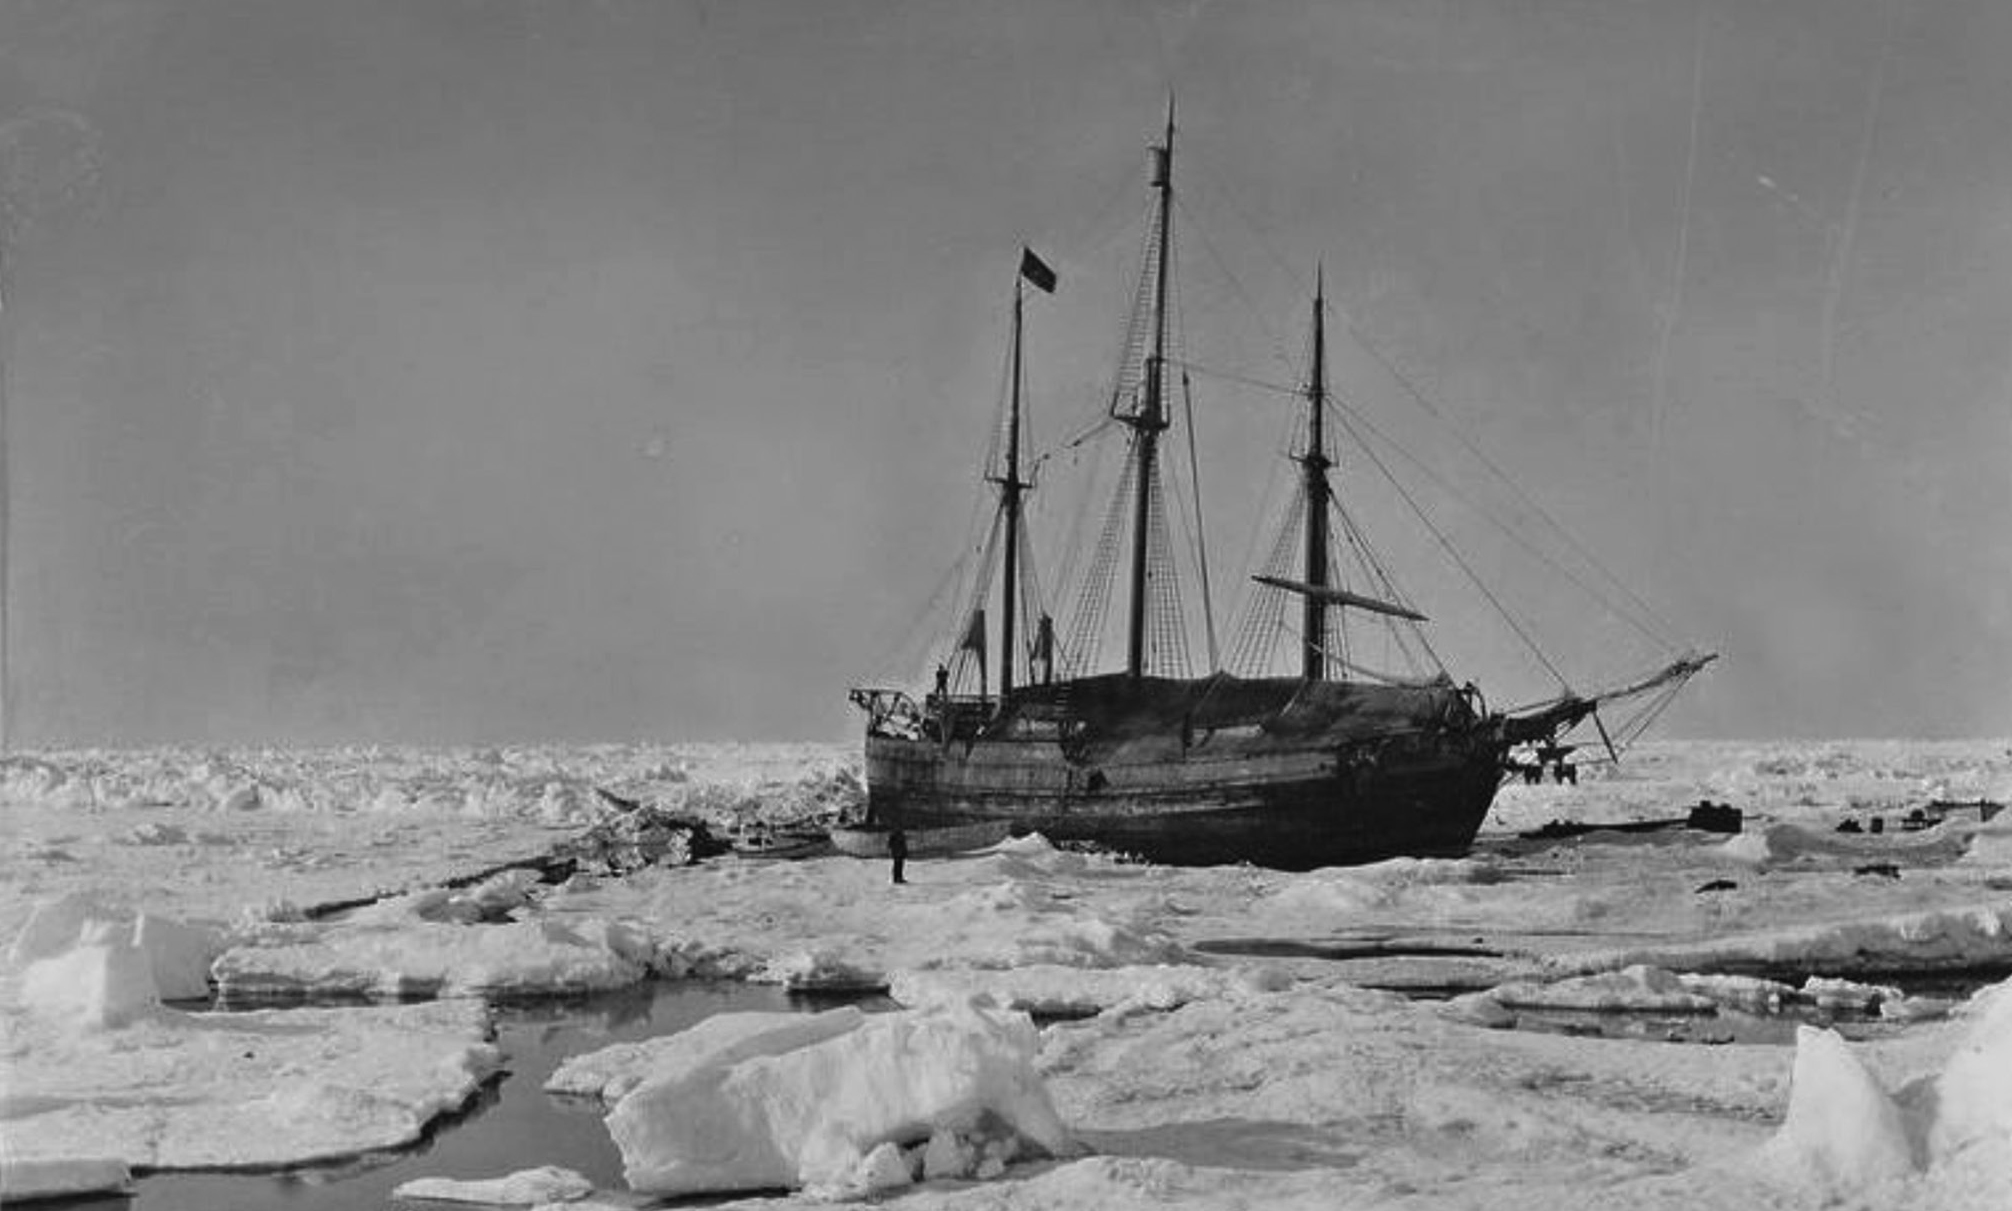 Figure 1 |	FIGURE 1: The 1893-1896 Fram Expedition was the first attempt to reach the North Pole by freezing a ship (the Fram) in Arctic sea ice and drifting with ocean currents. Image from the National Library of Norway.